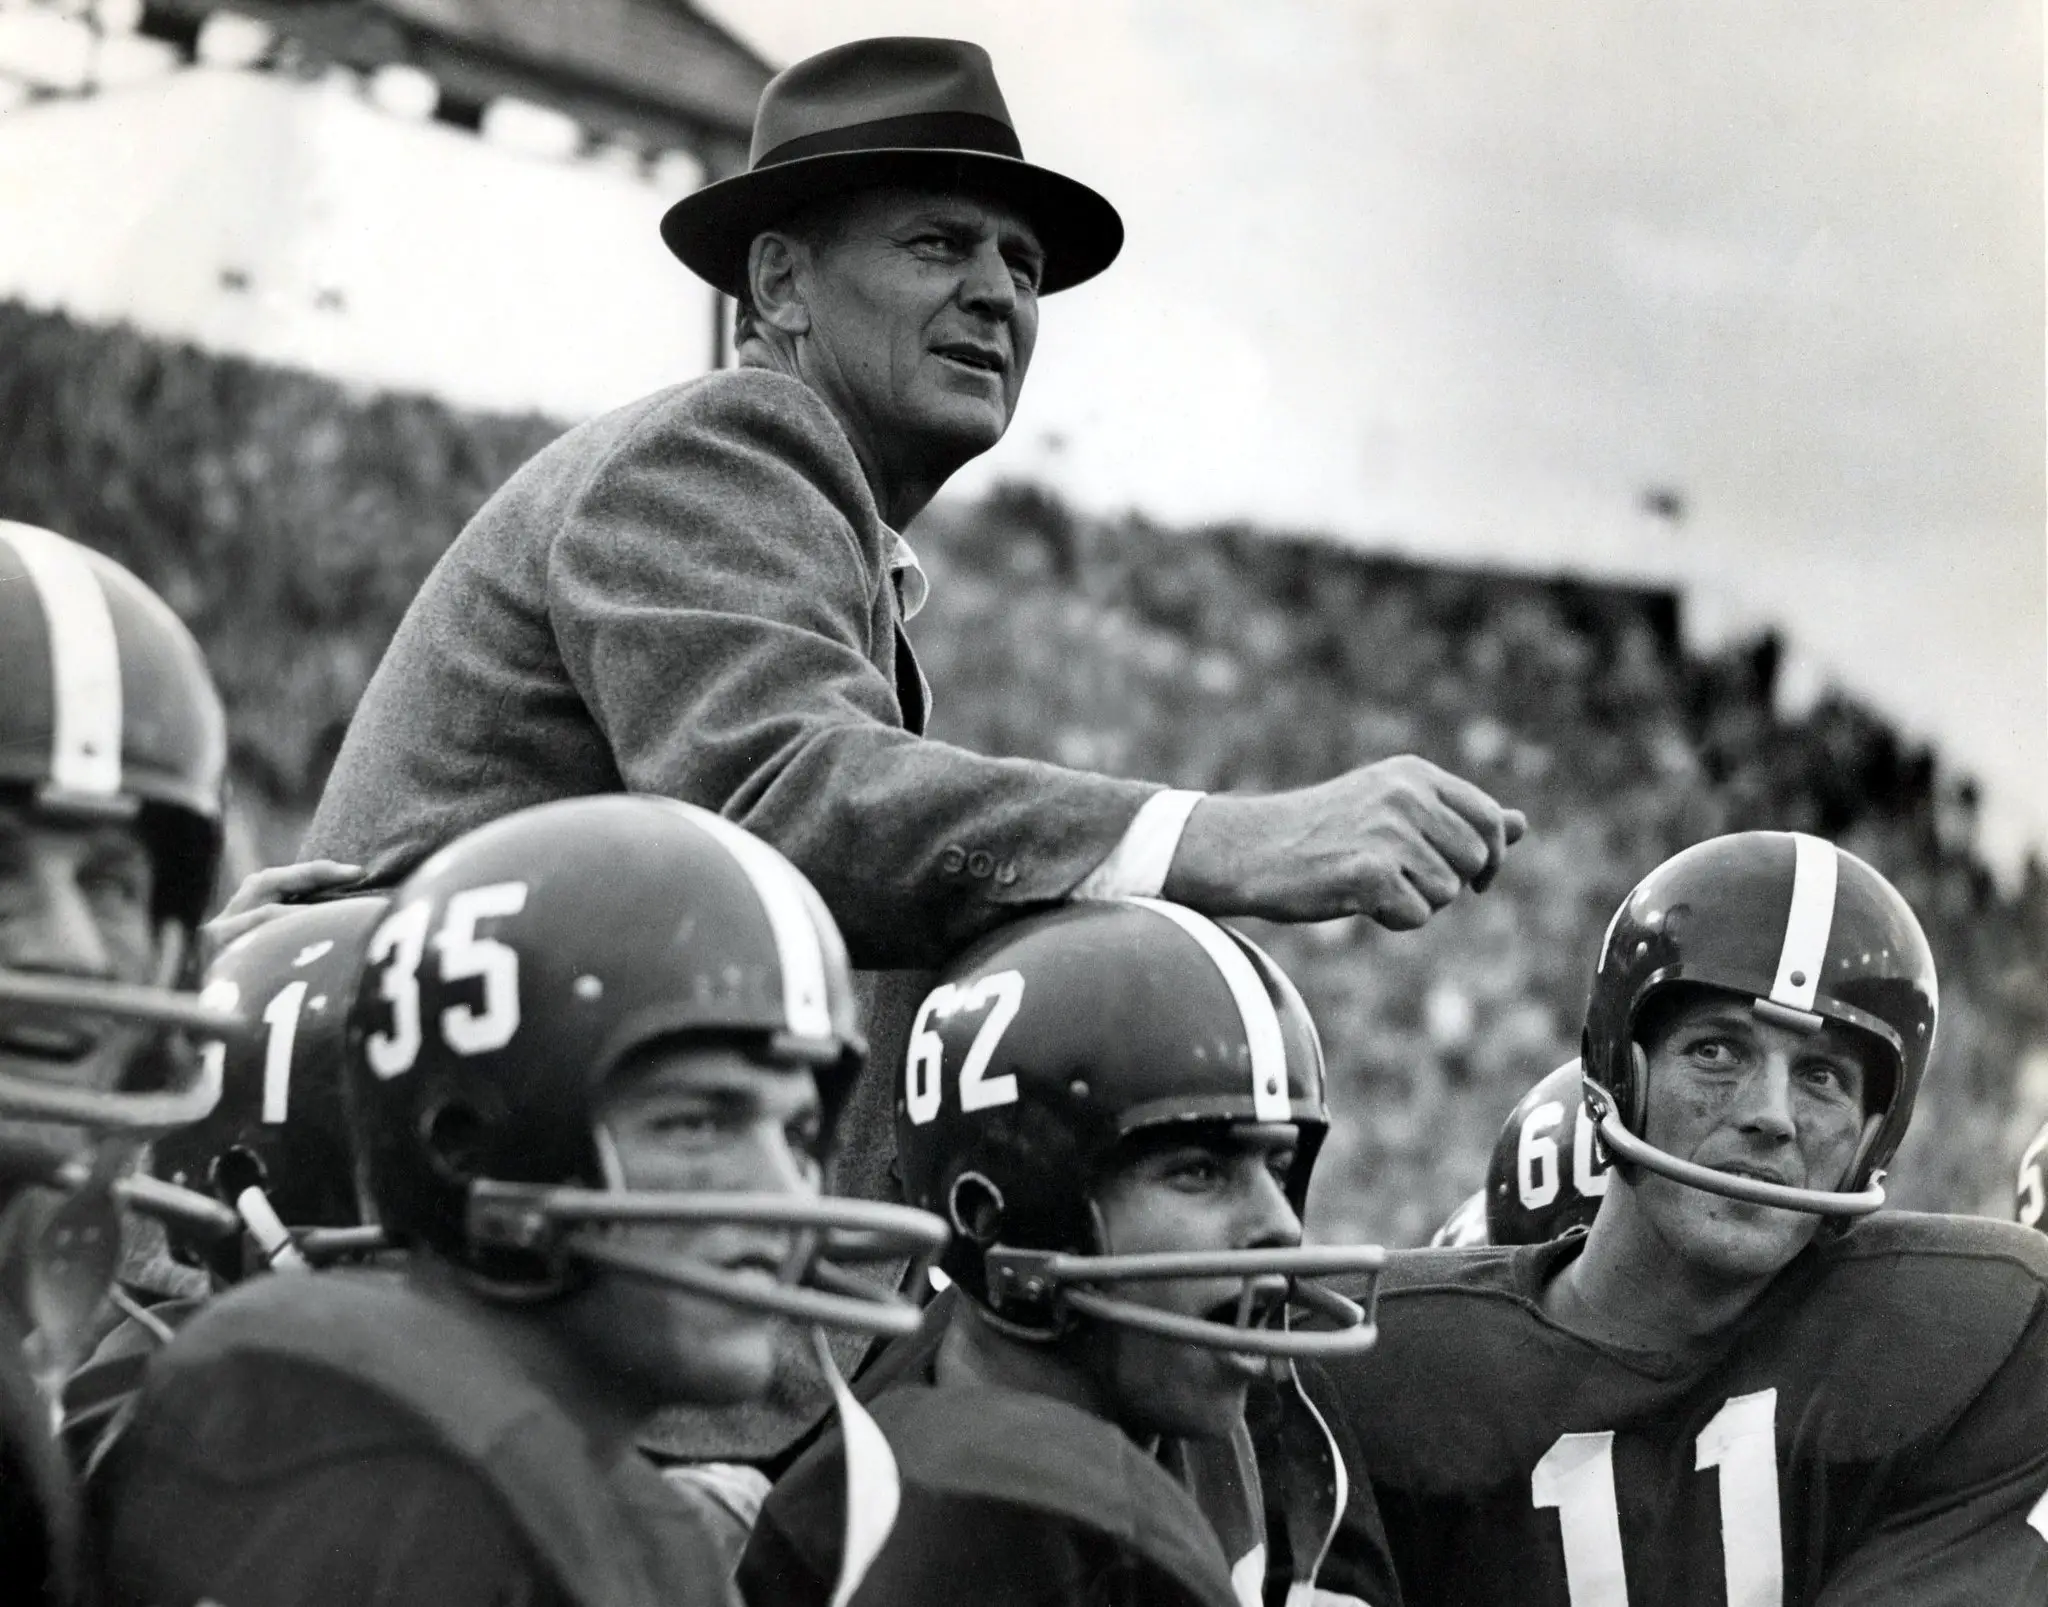 Coach Bear Bryant on the shoulders of his players